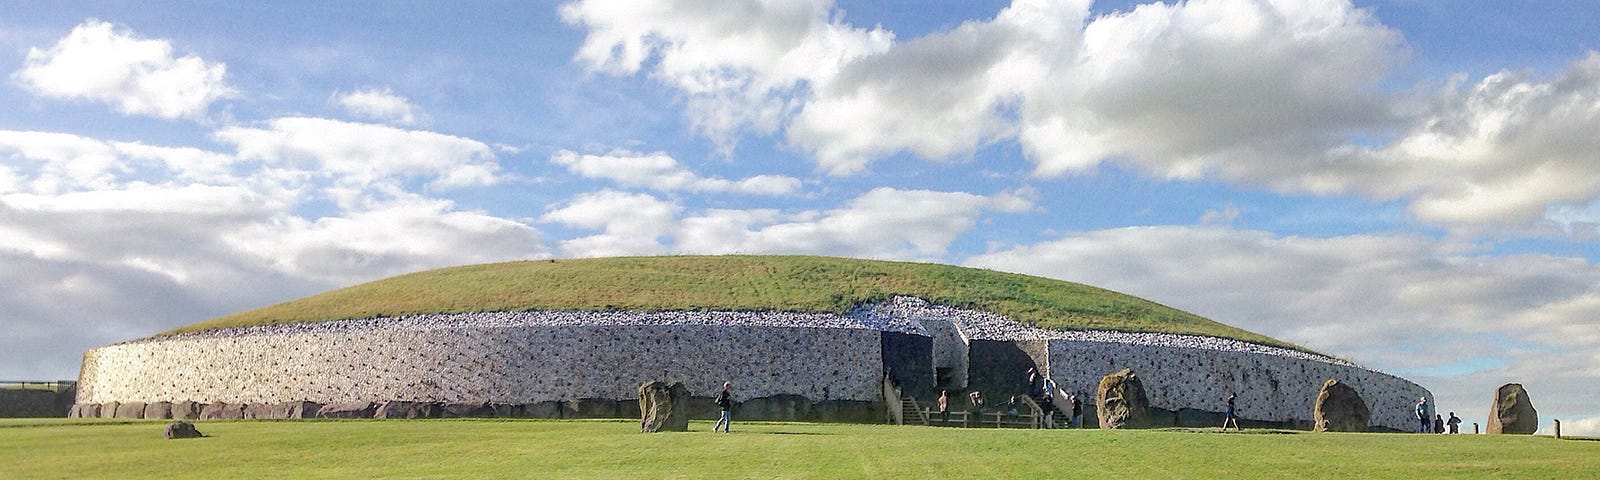 Newgrange Neolithic Passage Tomb — a huge shallow-domed edifice, edges faced in white stone and grass-topped.